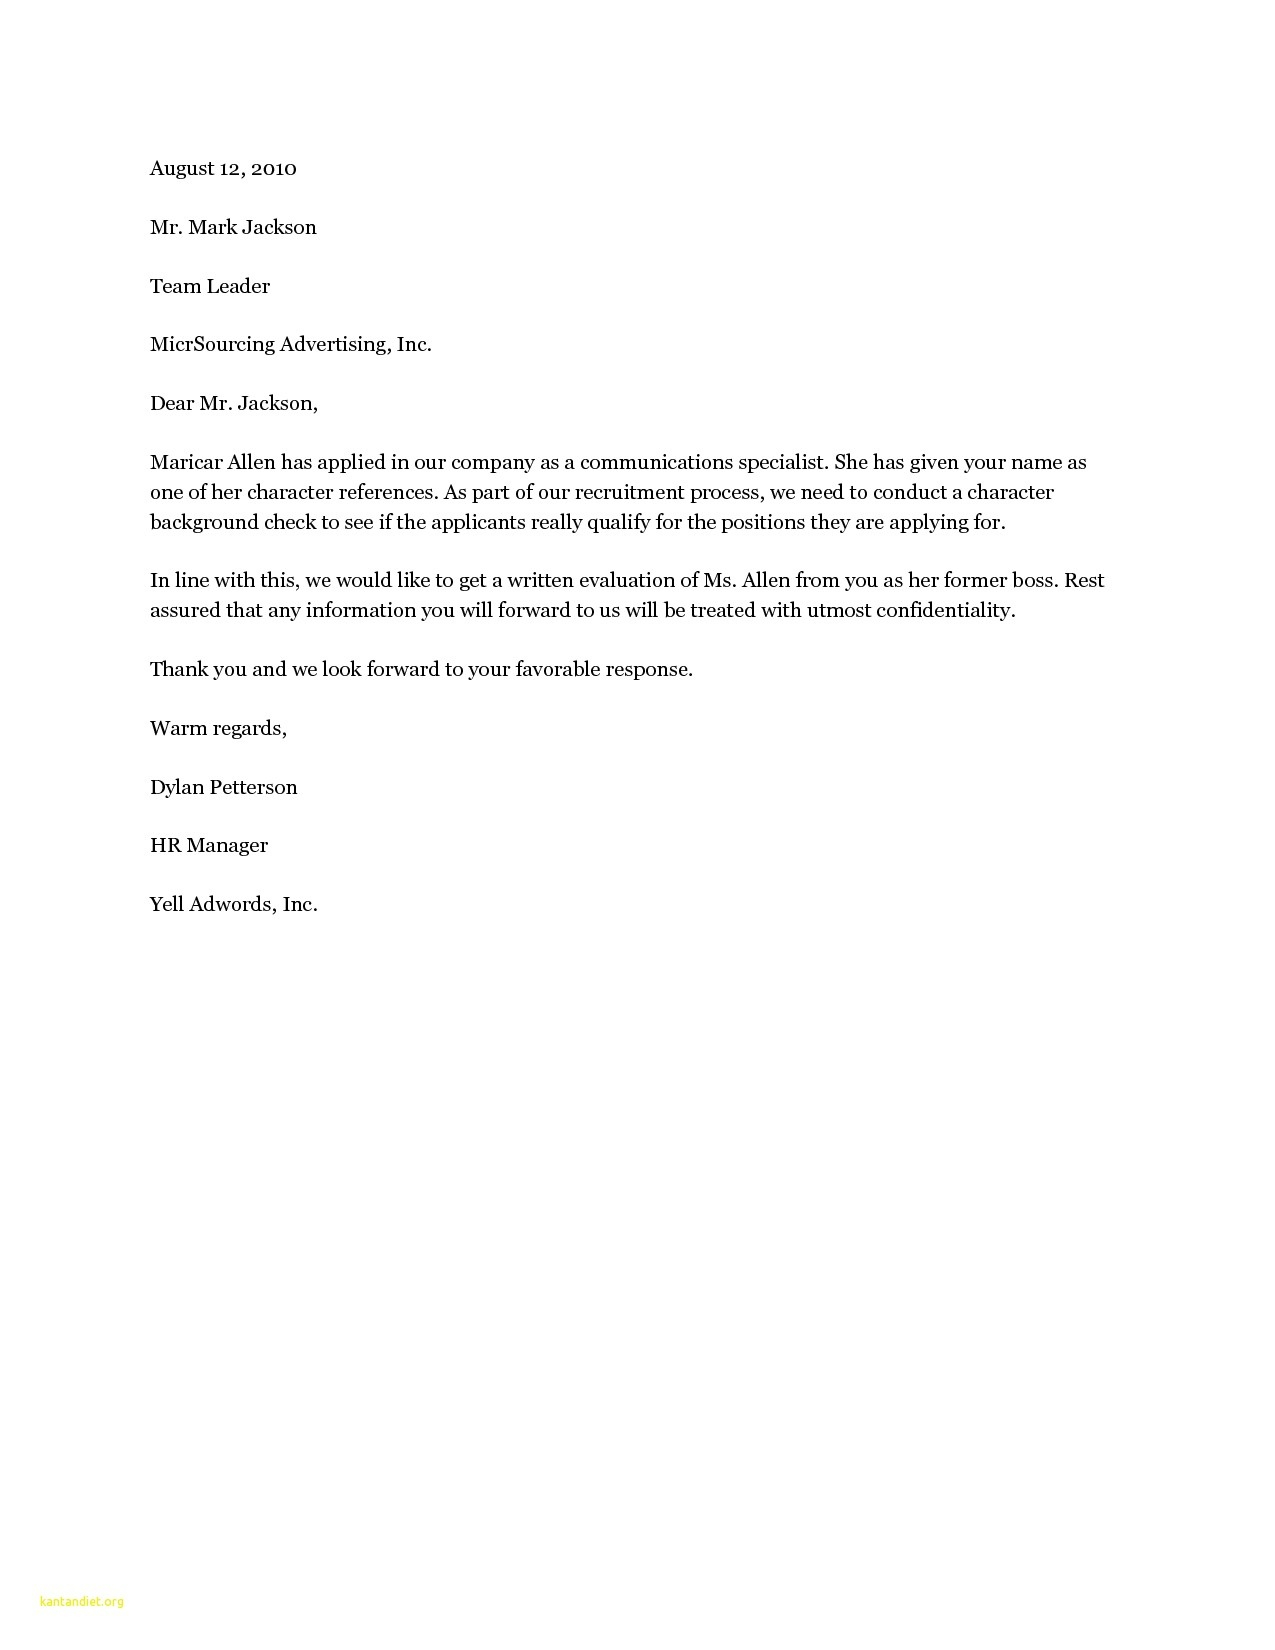 Personal Character Reference Letter Template Samples Letter